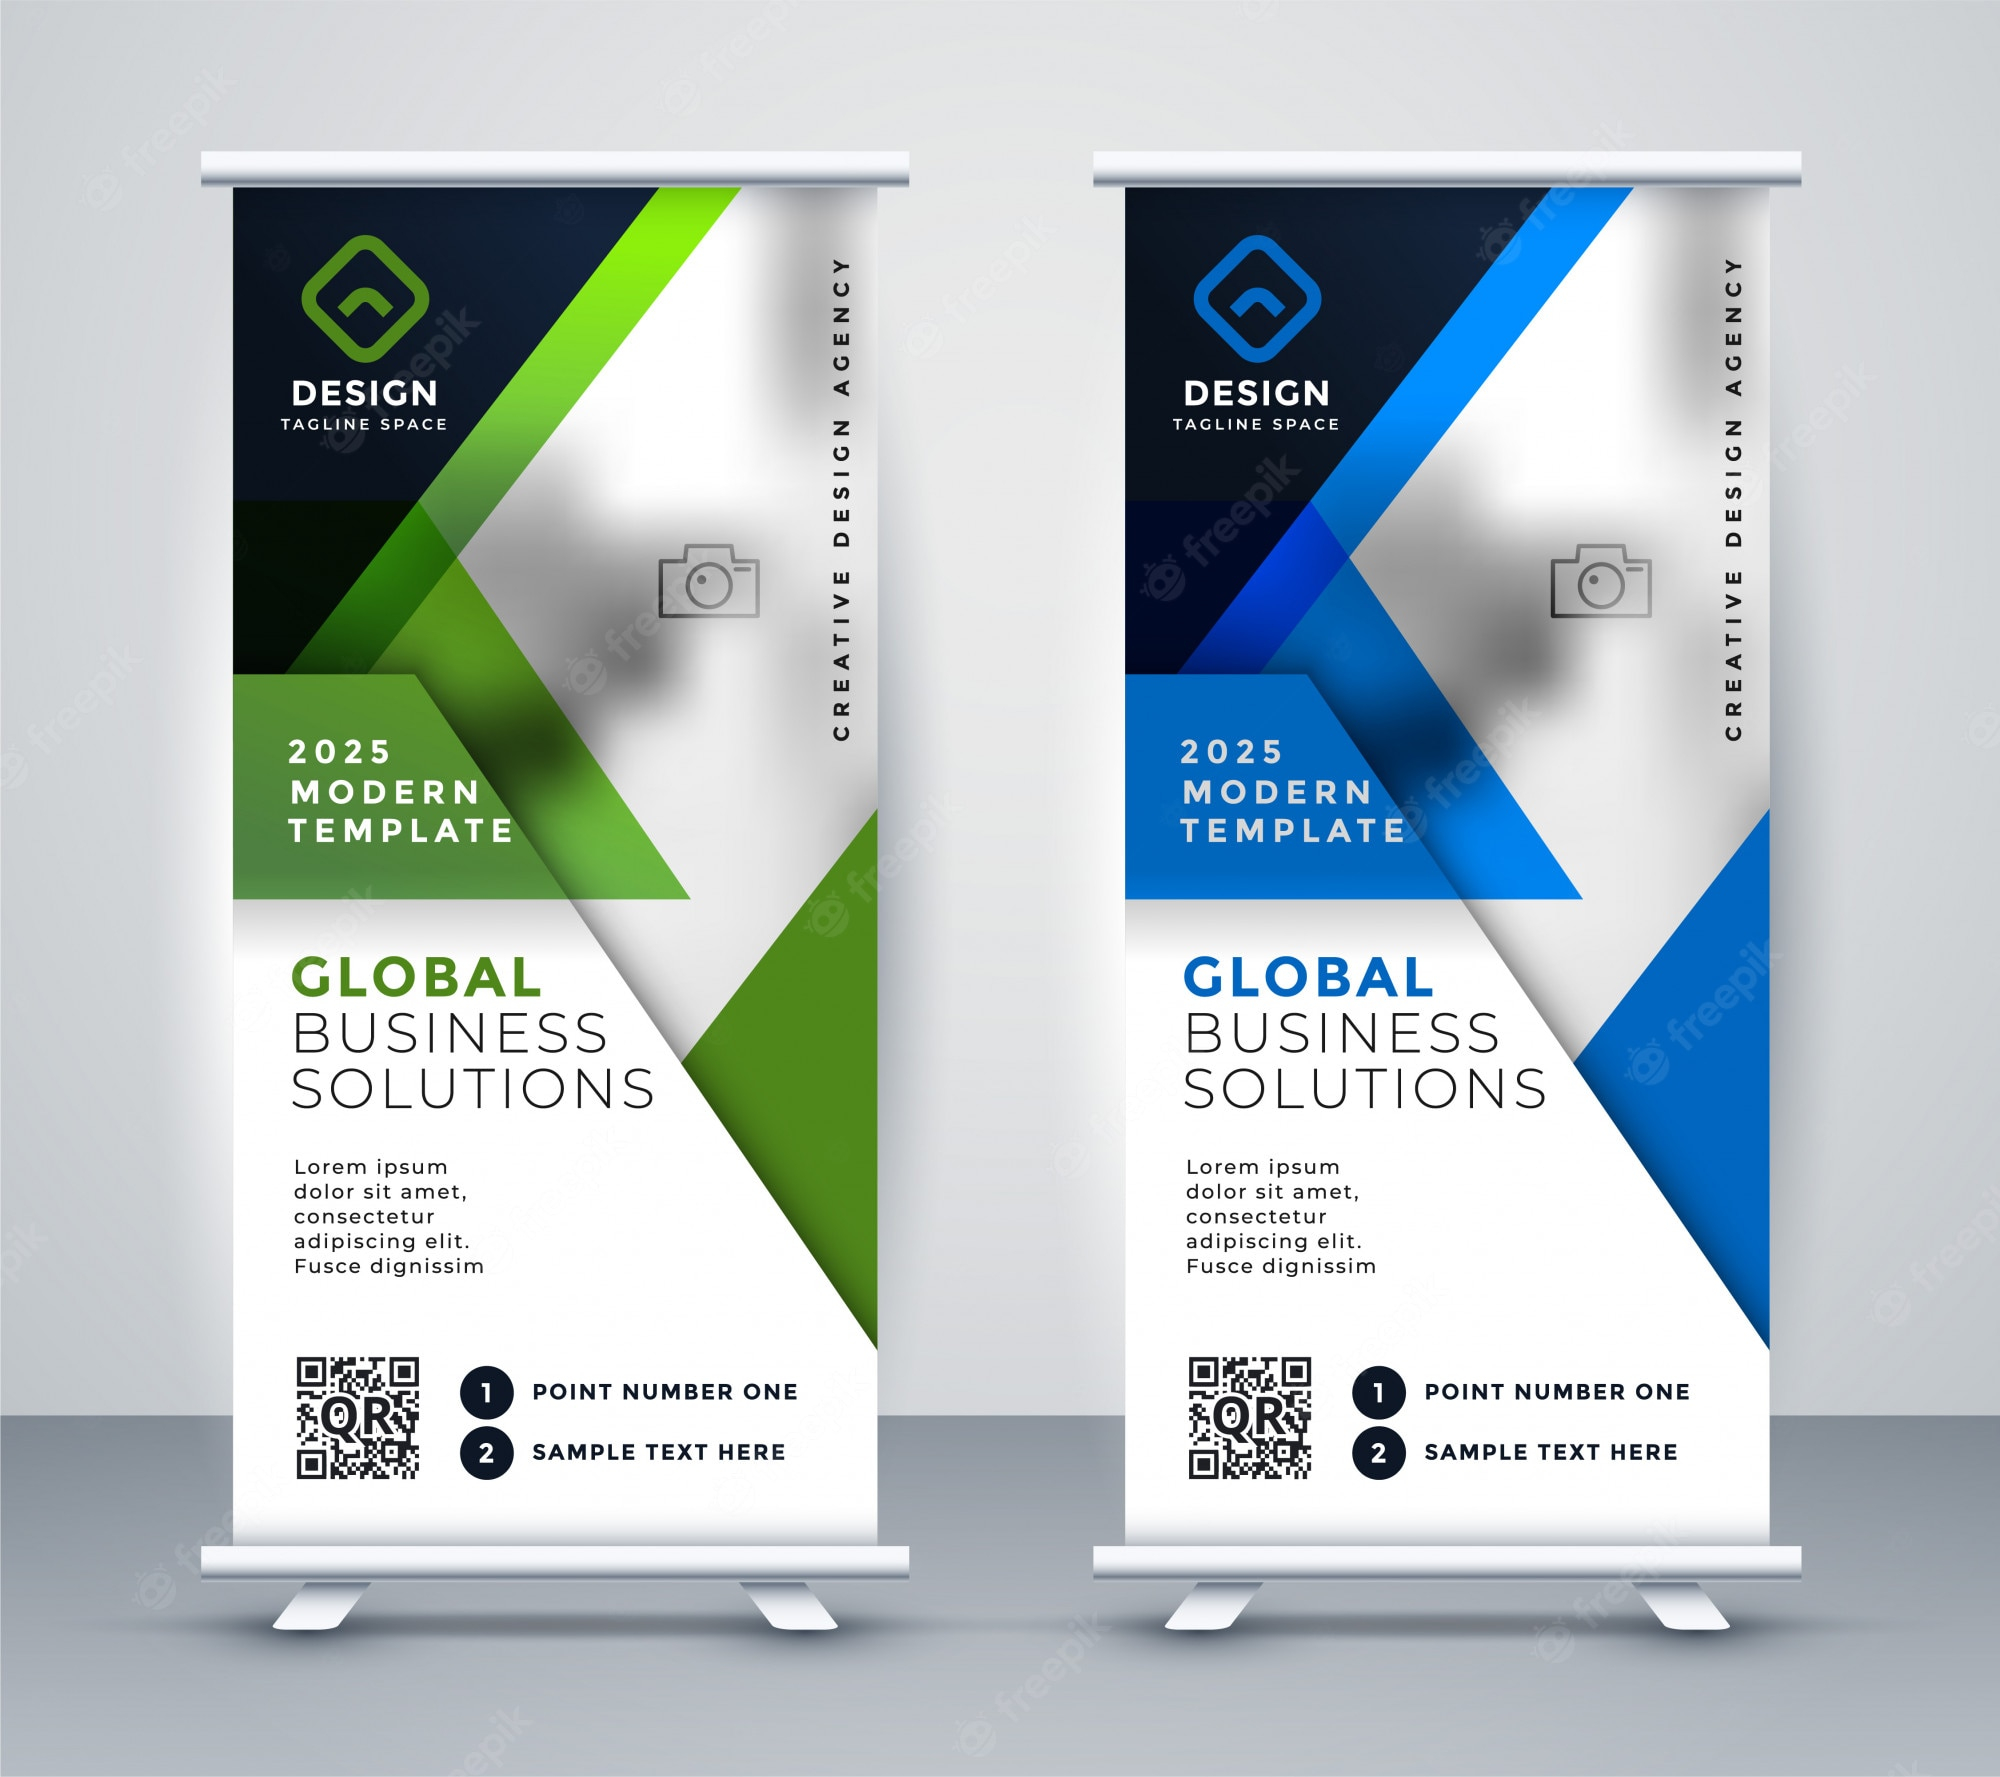 Standing banner Images  Free Vectors, Stock Photos & PSD Pertaining To Banner Stand Design Templates